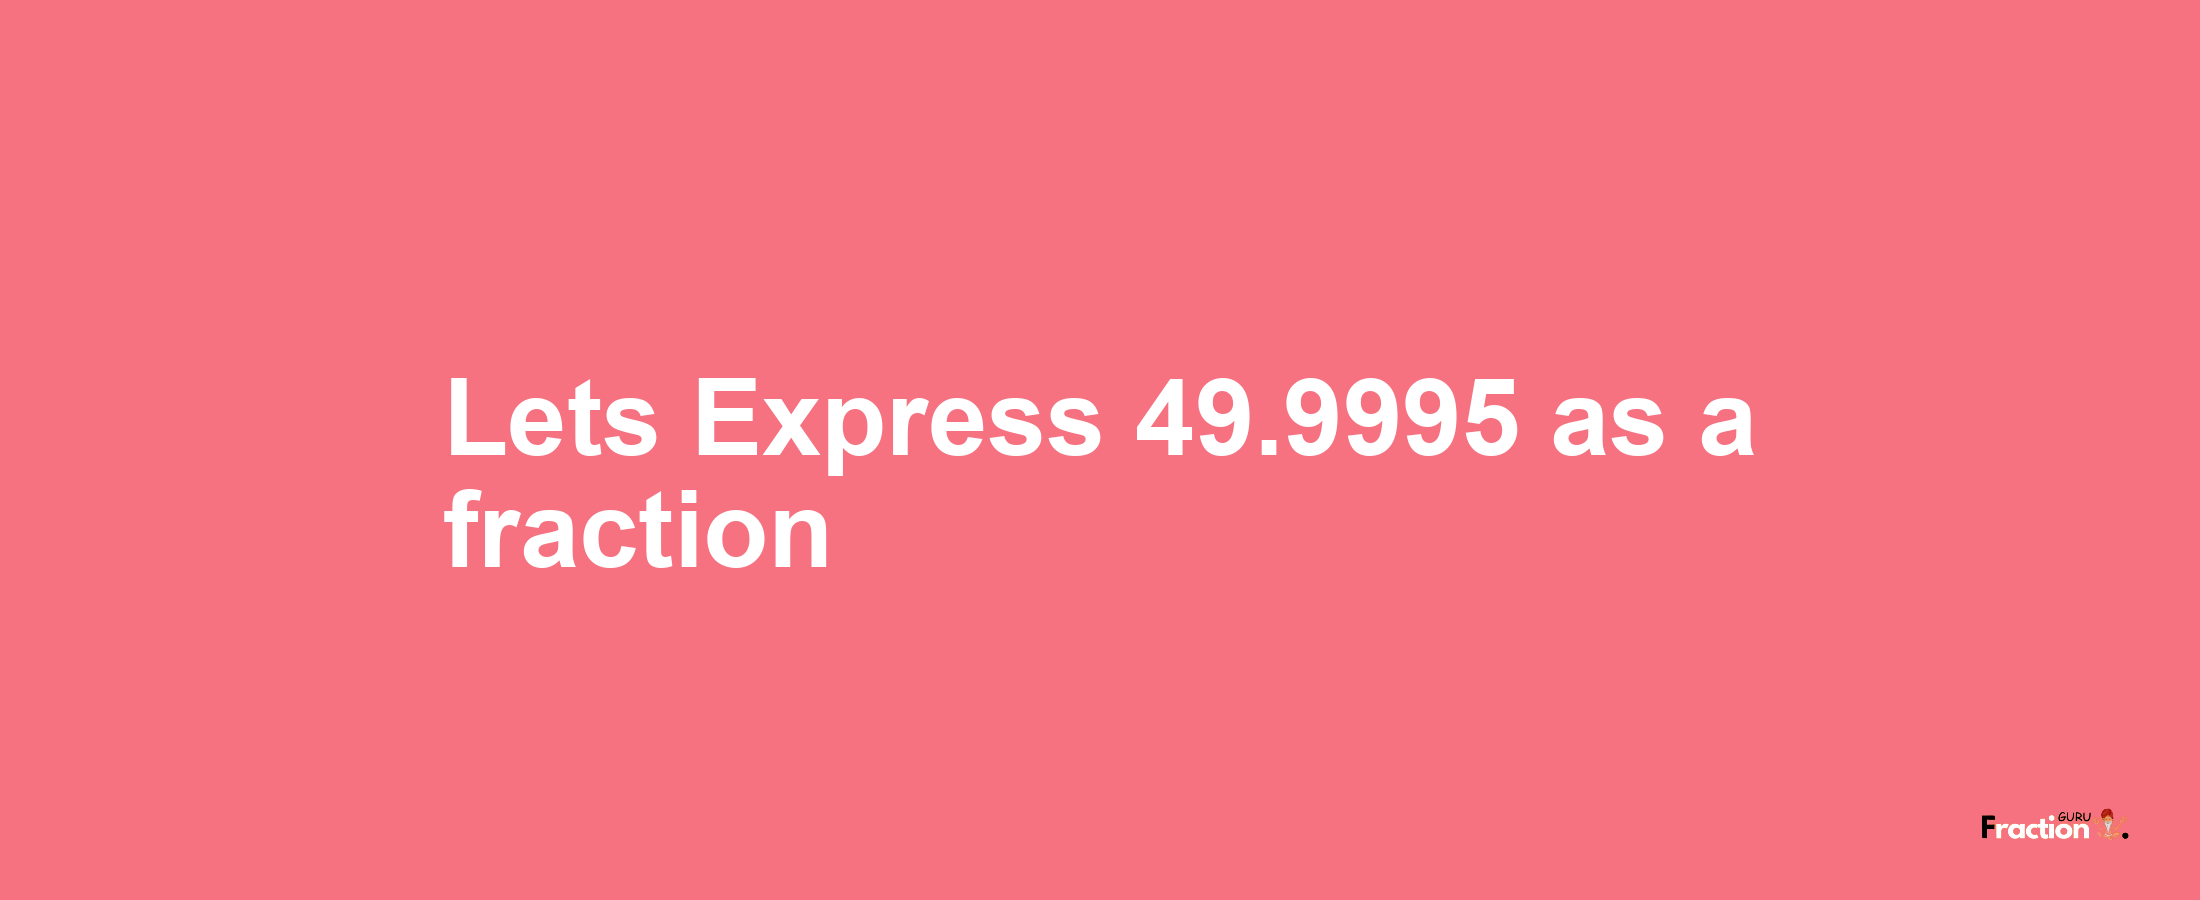 Lets Express 49.9995 as afraction